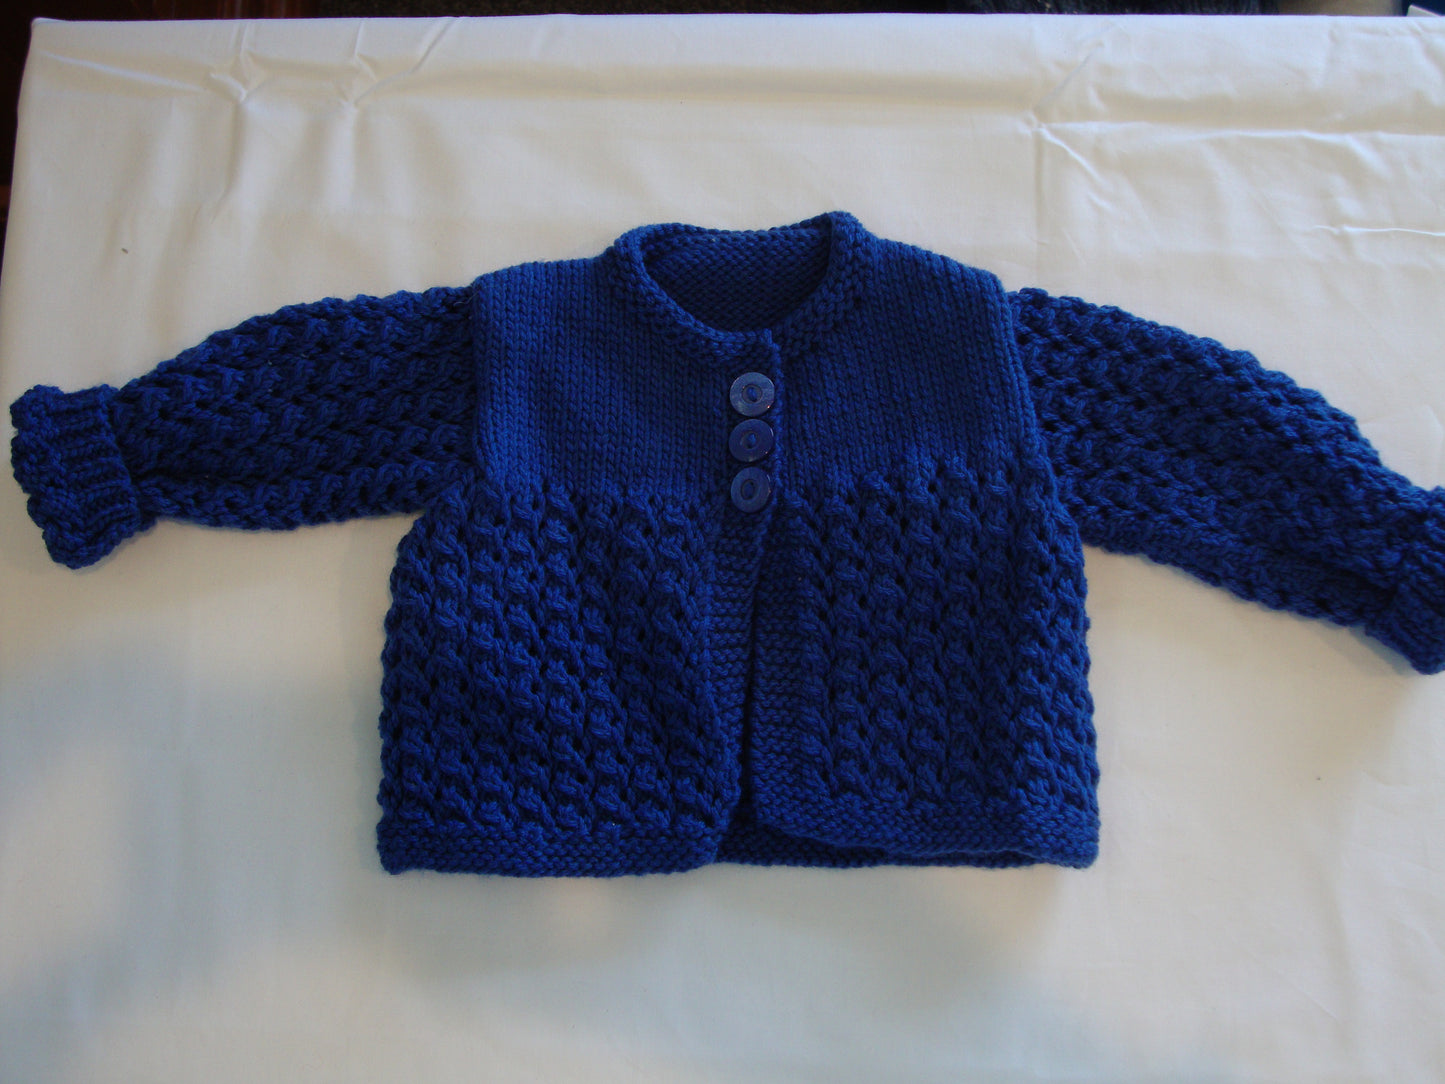 0-3 months old blue jersey with 3 buttons